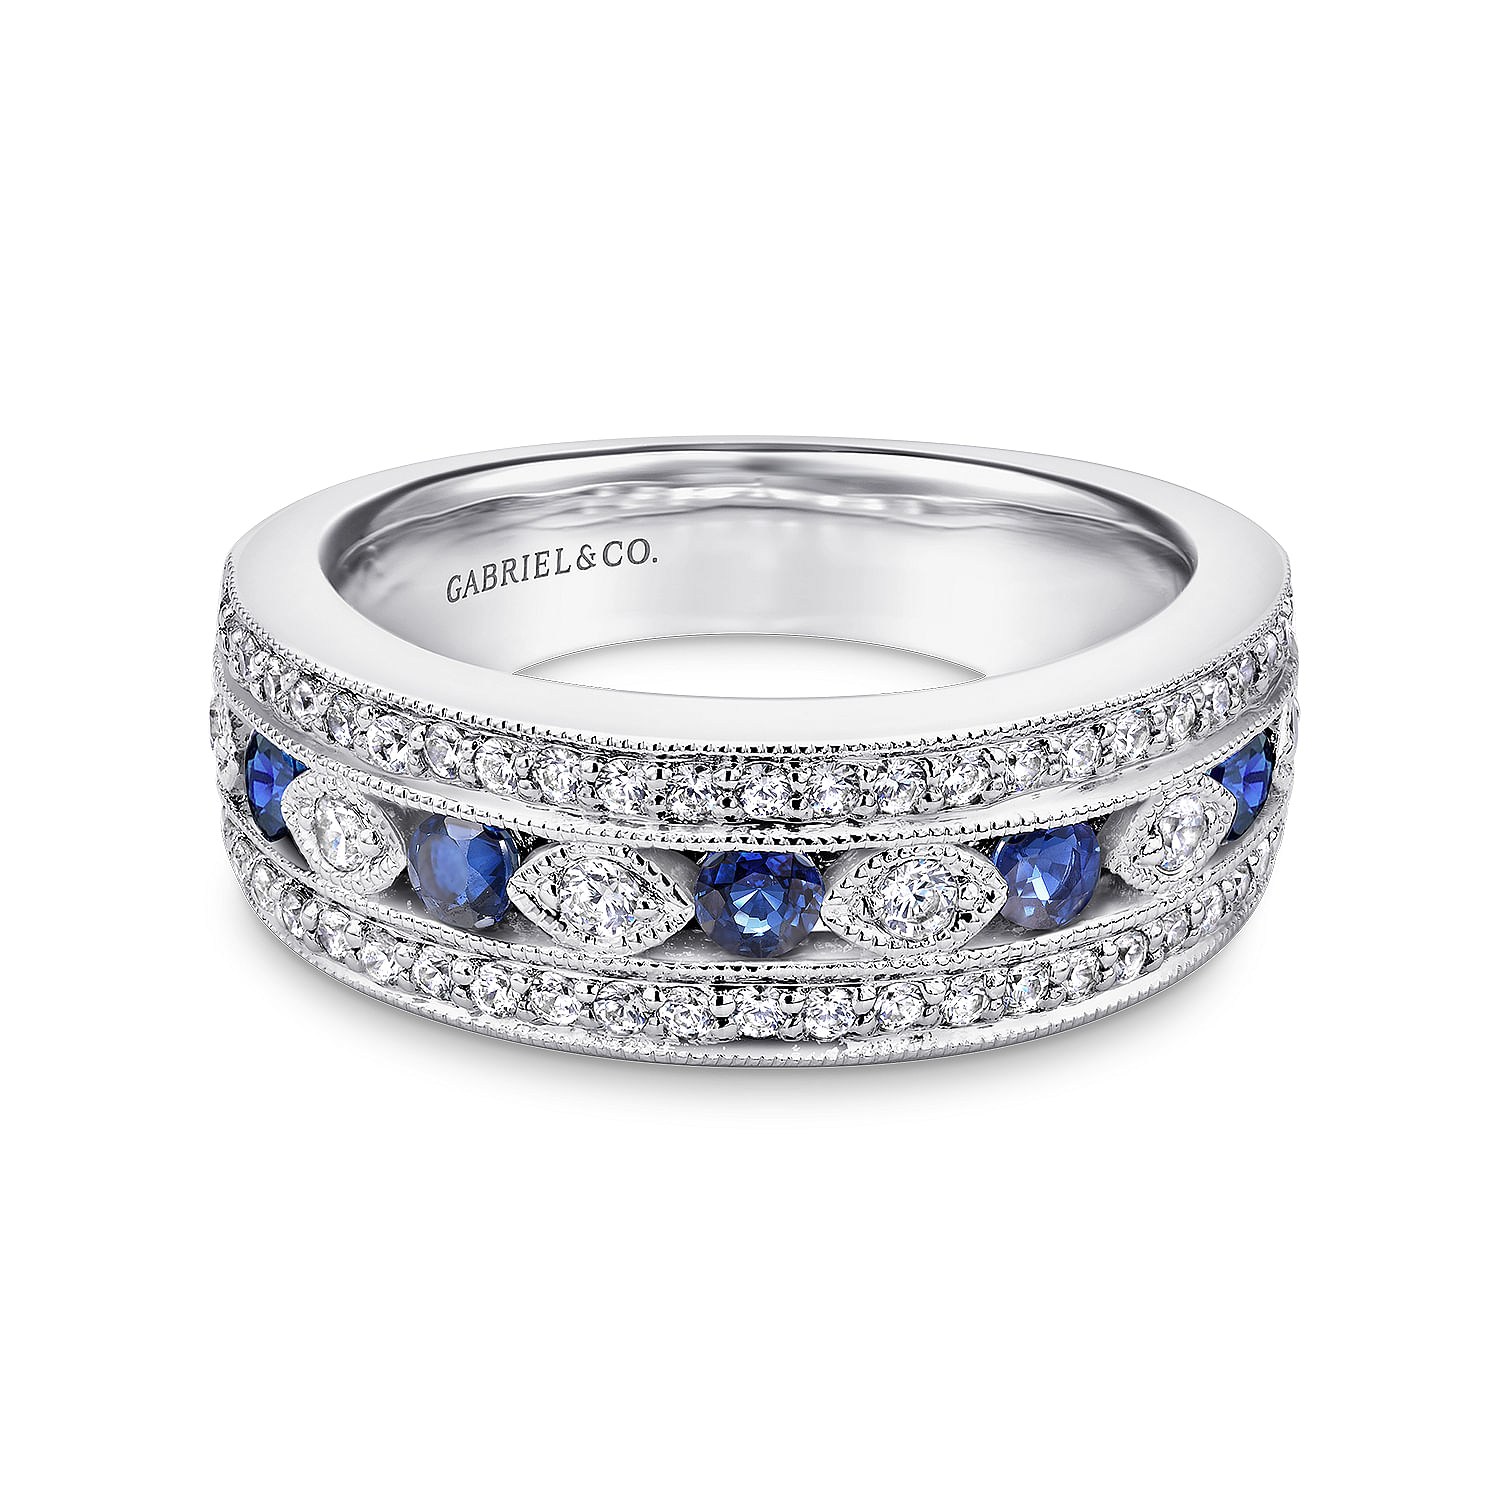 Gabriel - 14K White Gold Vintage Inspired Sapphire and Diamond Ring